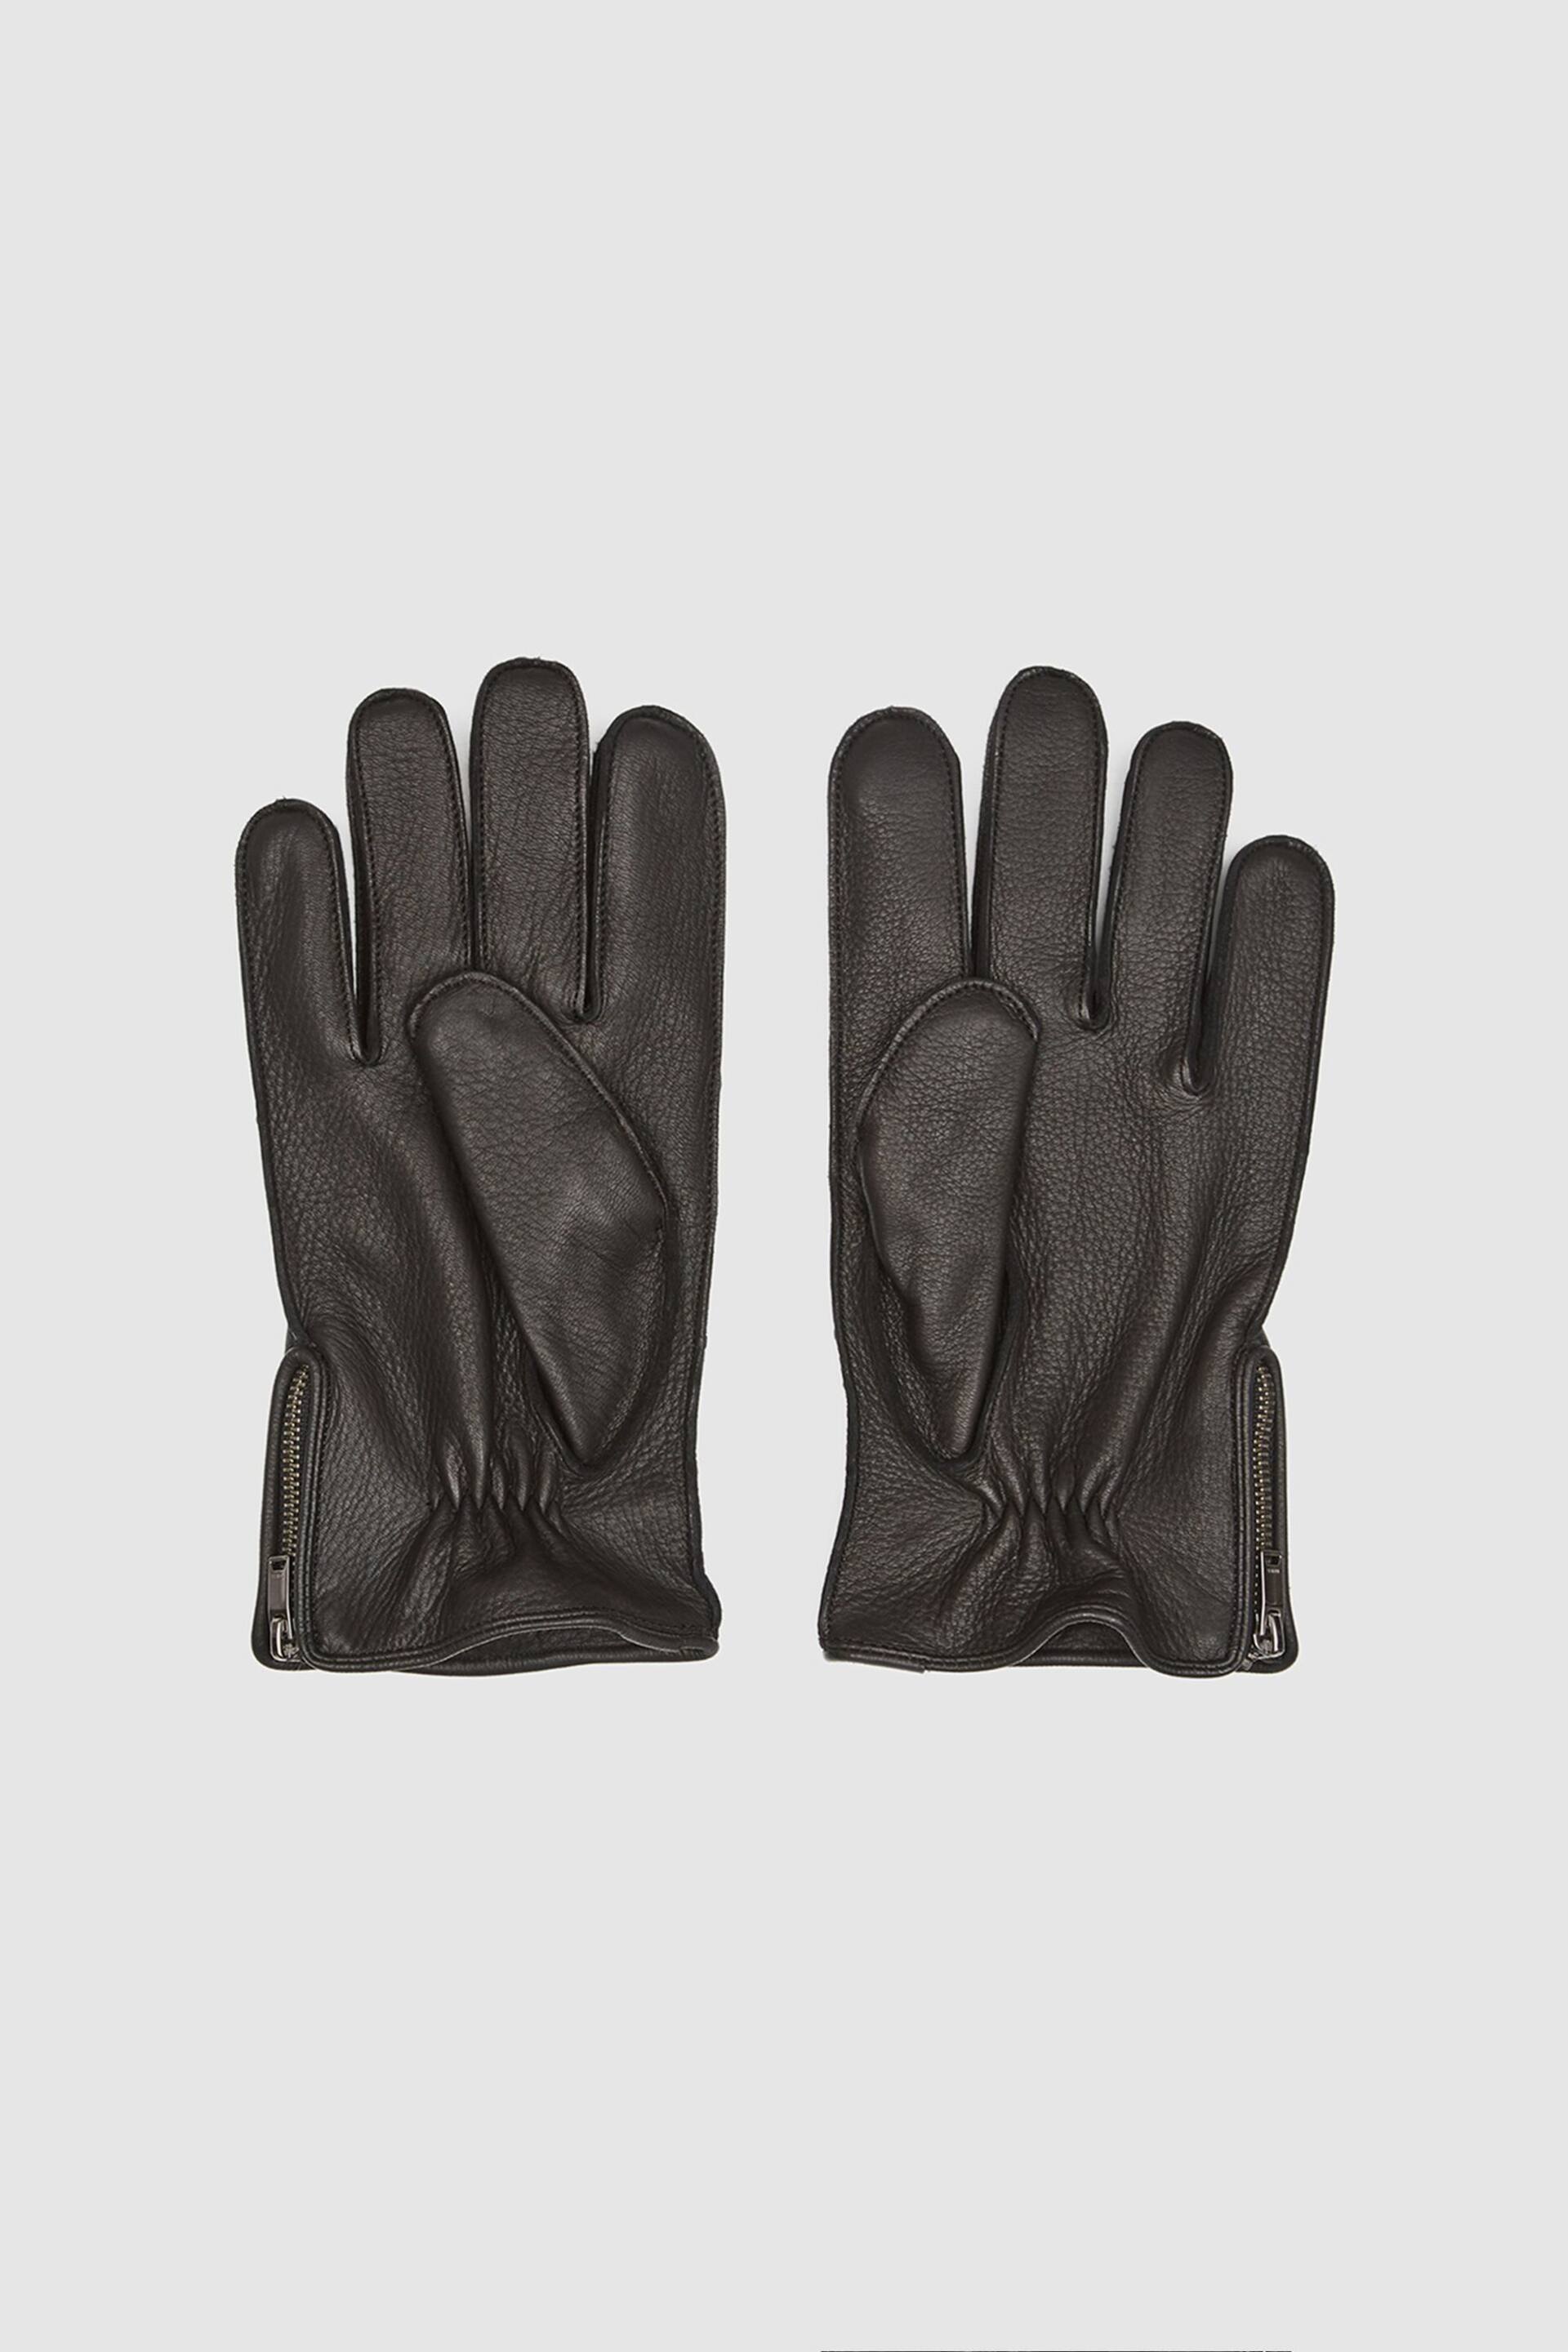 Reiss Black Iowa Leather Gloves - Image 3 of 4